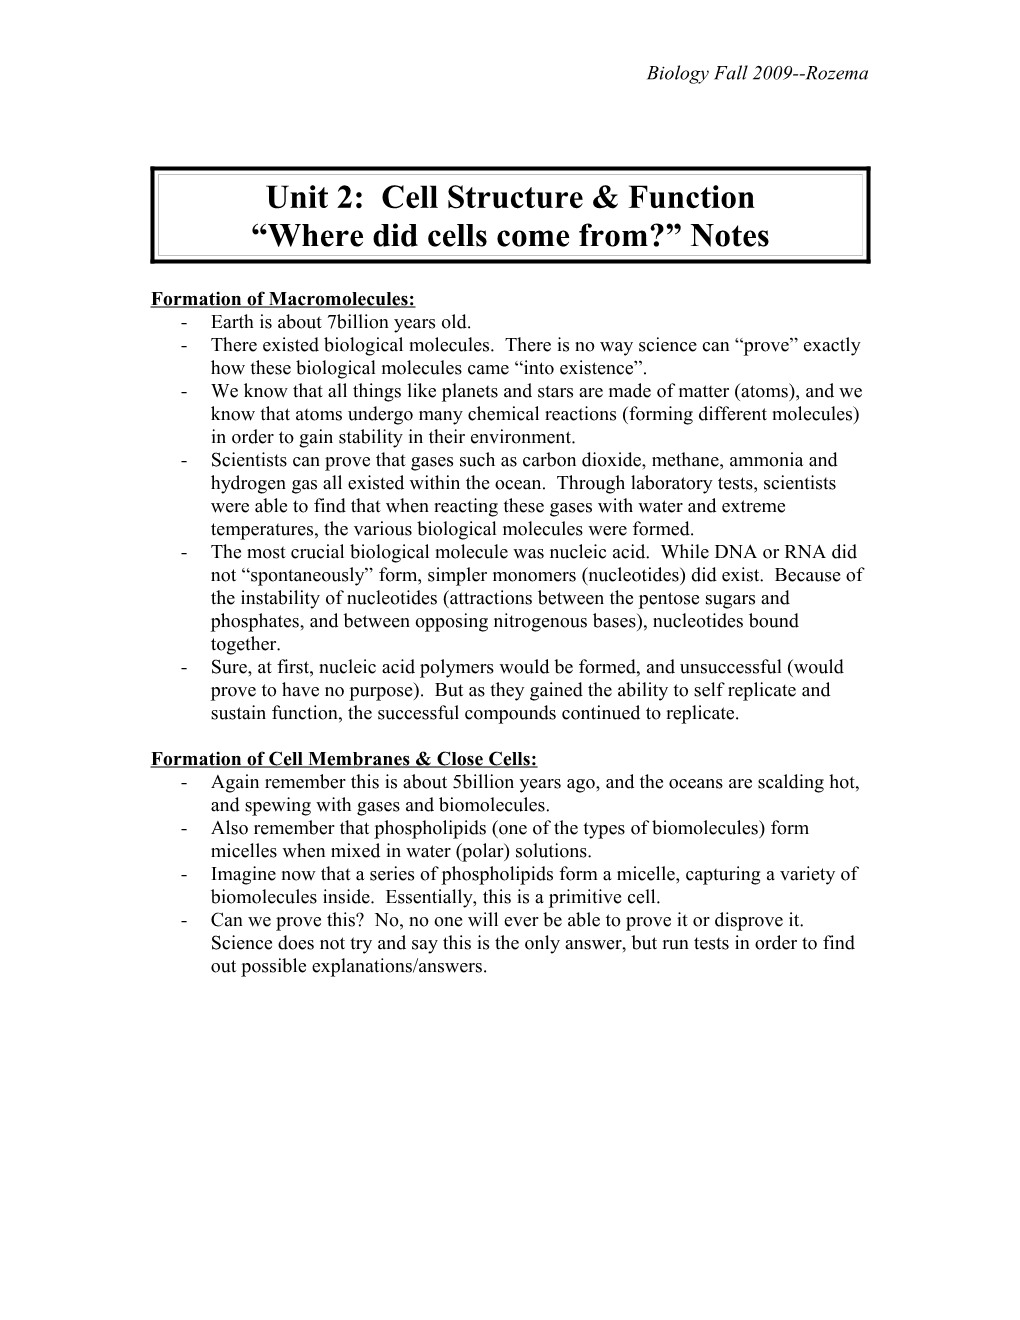 Unit 2: Cell Structure & Function